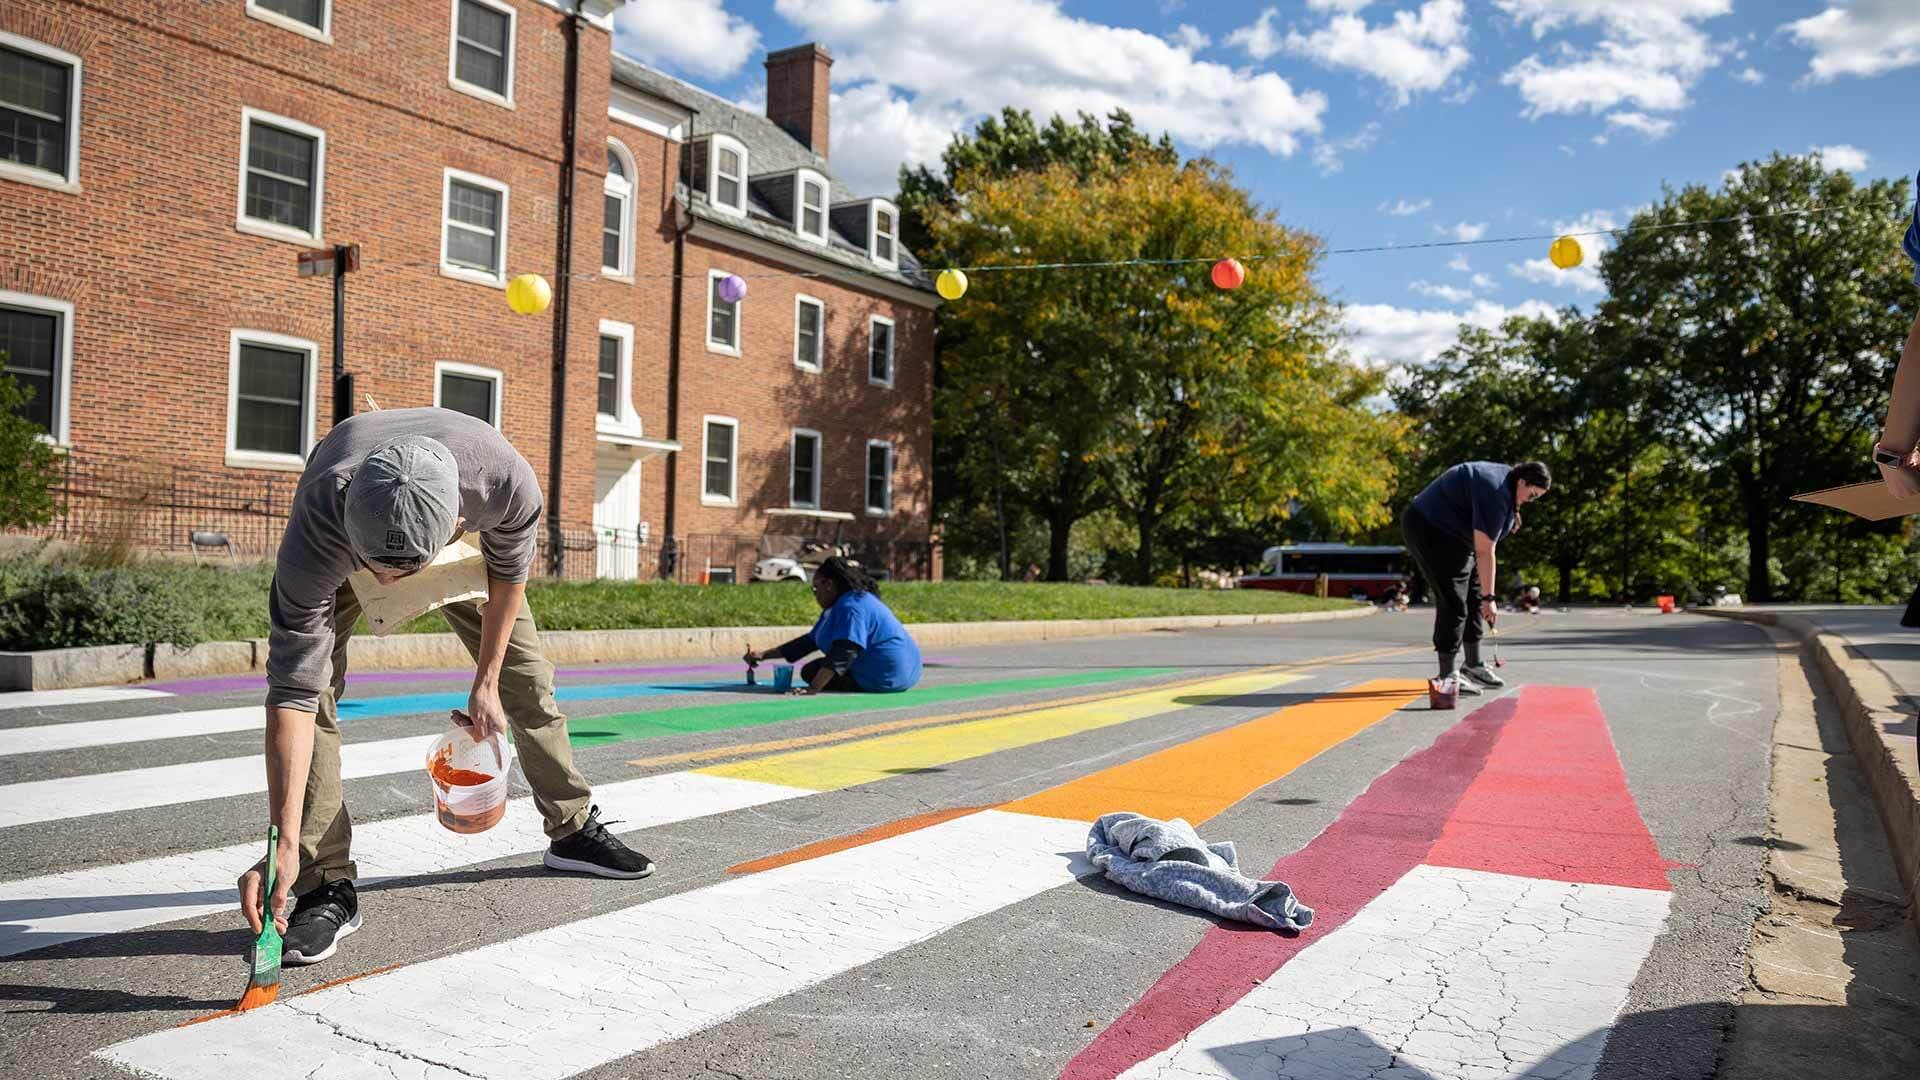 Painter applies colorful paint to a crosswalk near an academic building